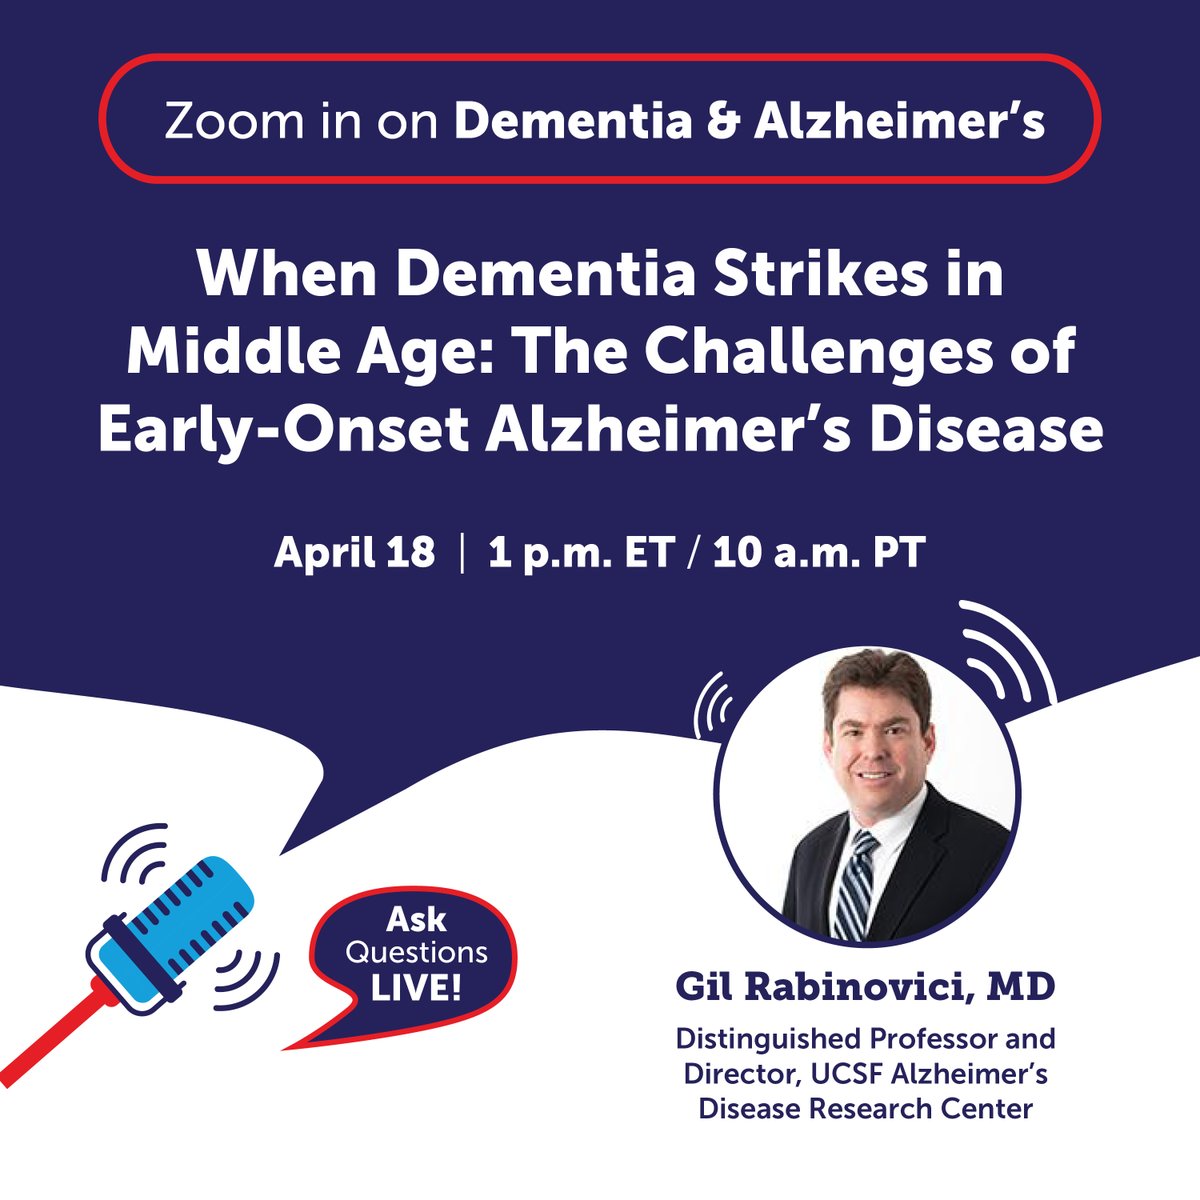 Join our conversation and live Q&A on April 18 with guest expert Dr. Gil Rabinovici to explore how early-onset Alzheimer's disease, which affects individuals as early as their 30s and 40s, differs from the most common form of the disease. Learn more: bit.ly/42x1AOJ